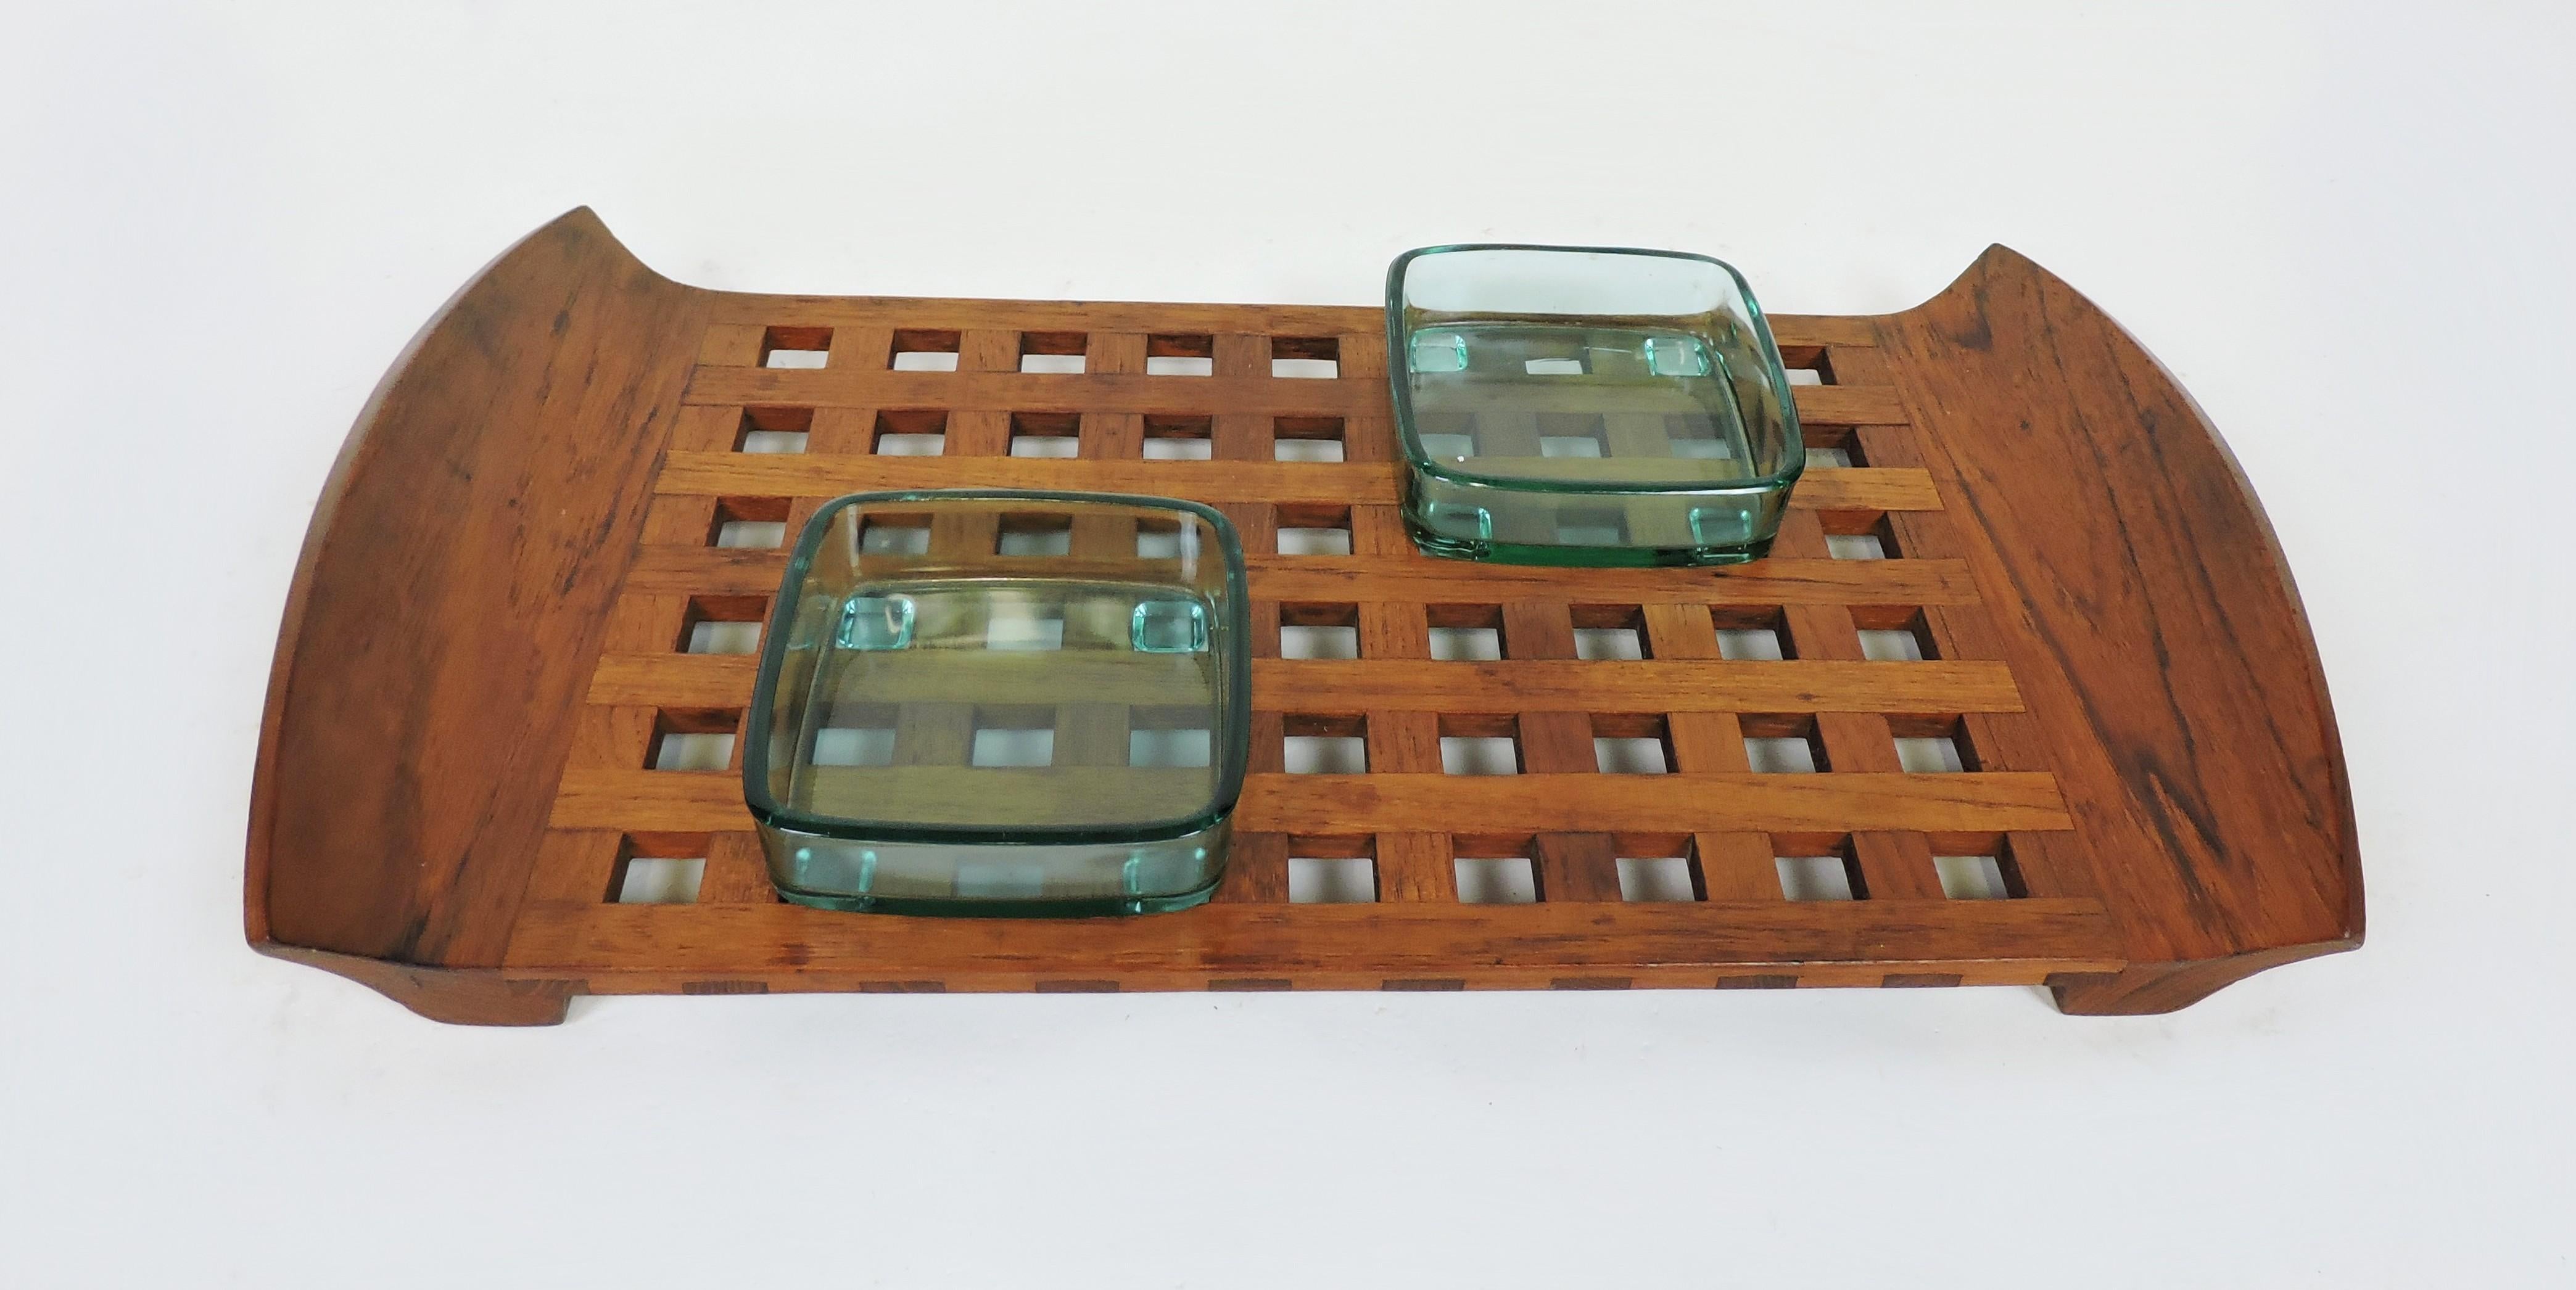 Lovely lattice teak tray with two blue glass inserts designed by Jens Quistgaard and made in Denmark by Dansk. The glass inserts are 4.25 inches square and have feet on the bottom that hold them in place. Stamped on bottom with Dansk logo. Could